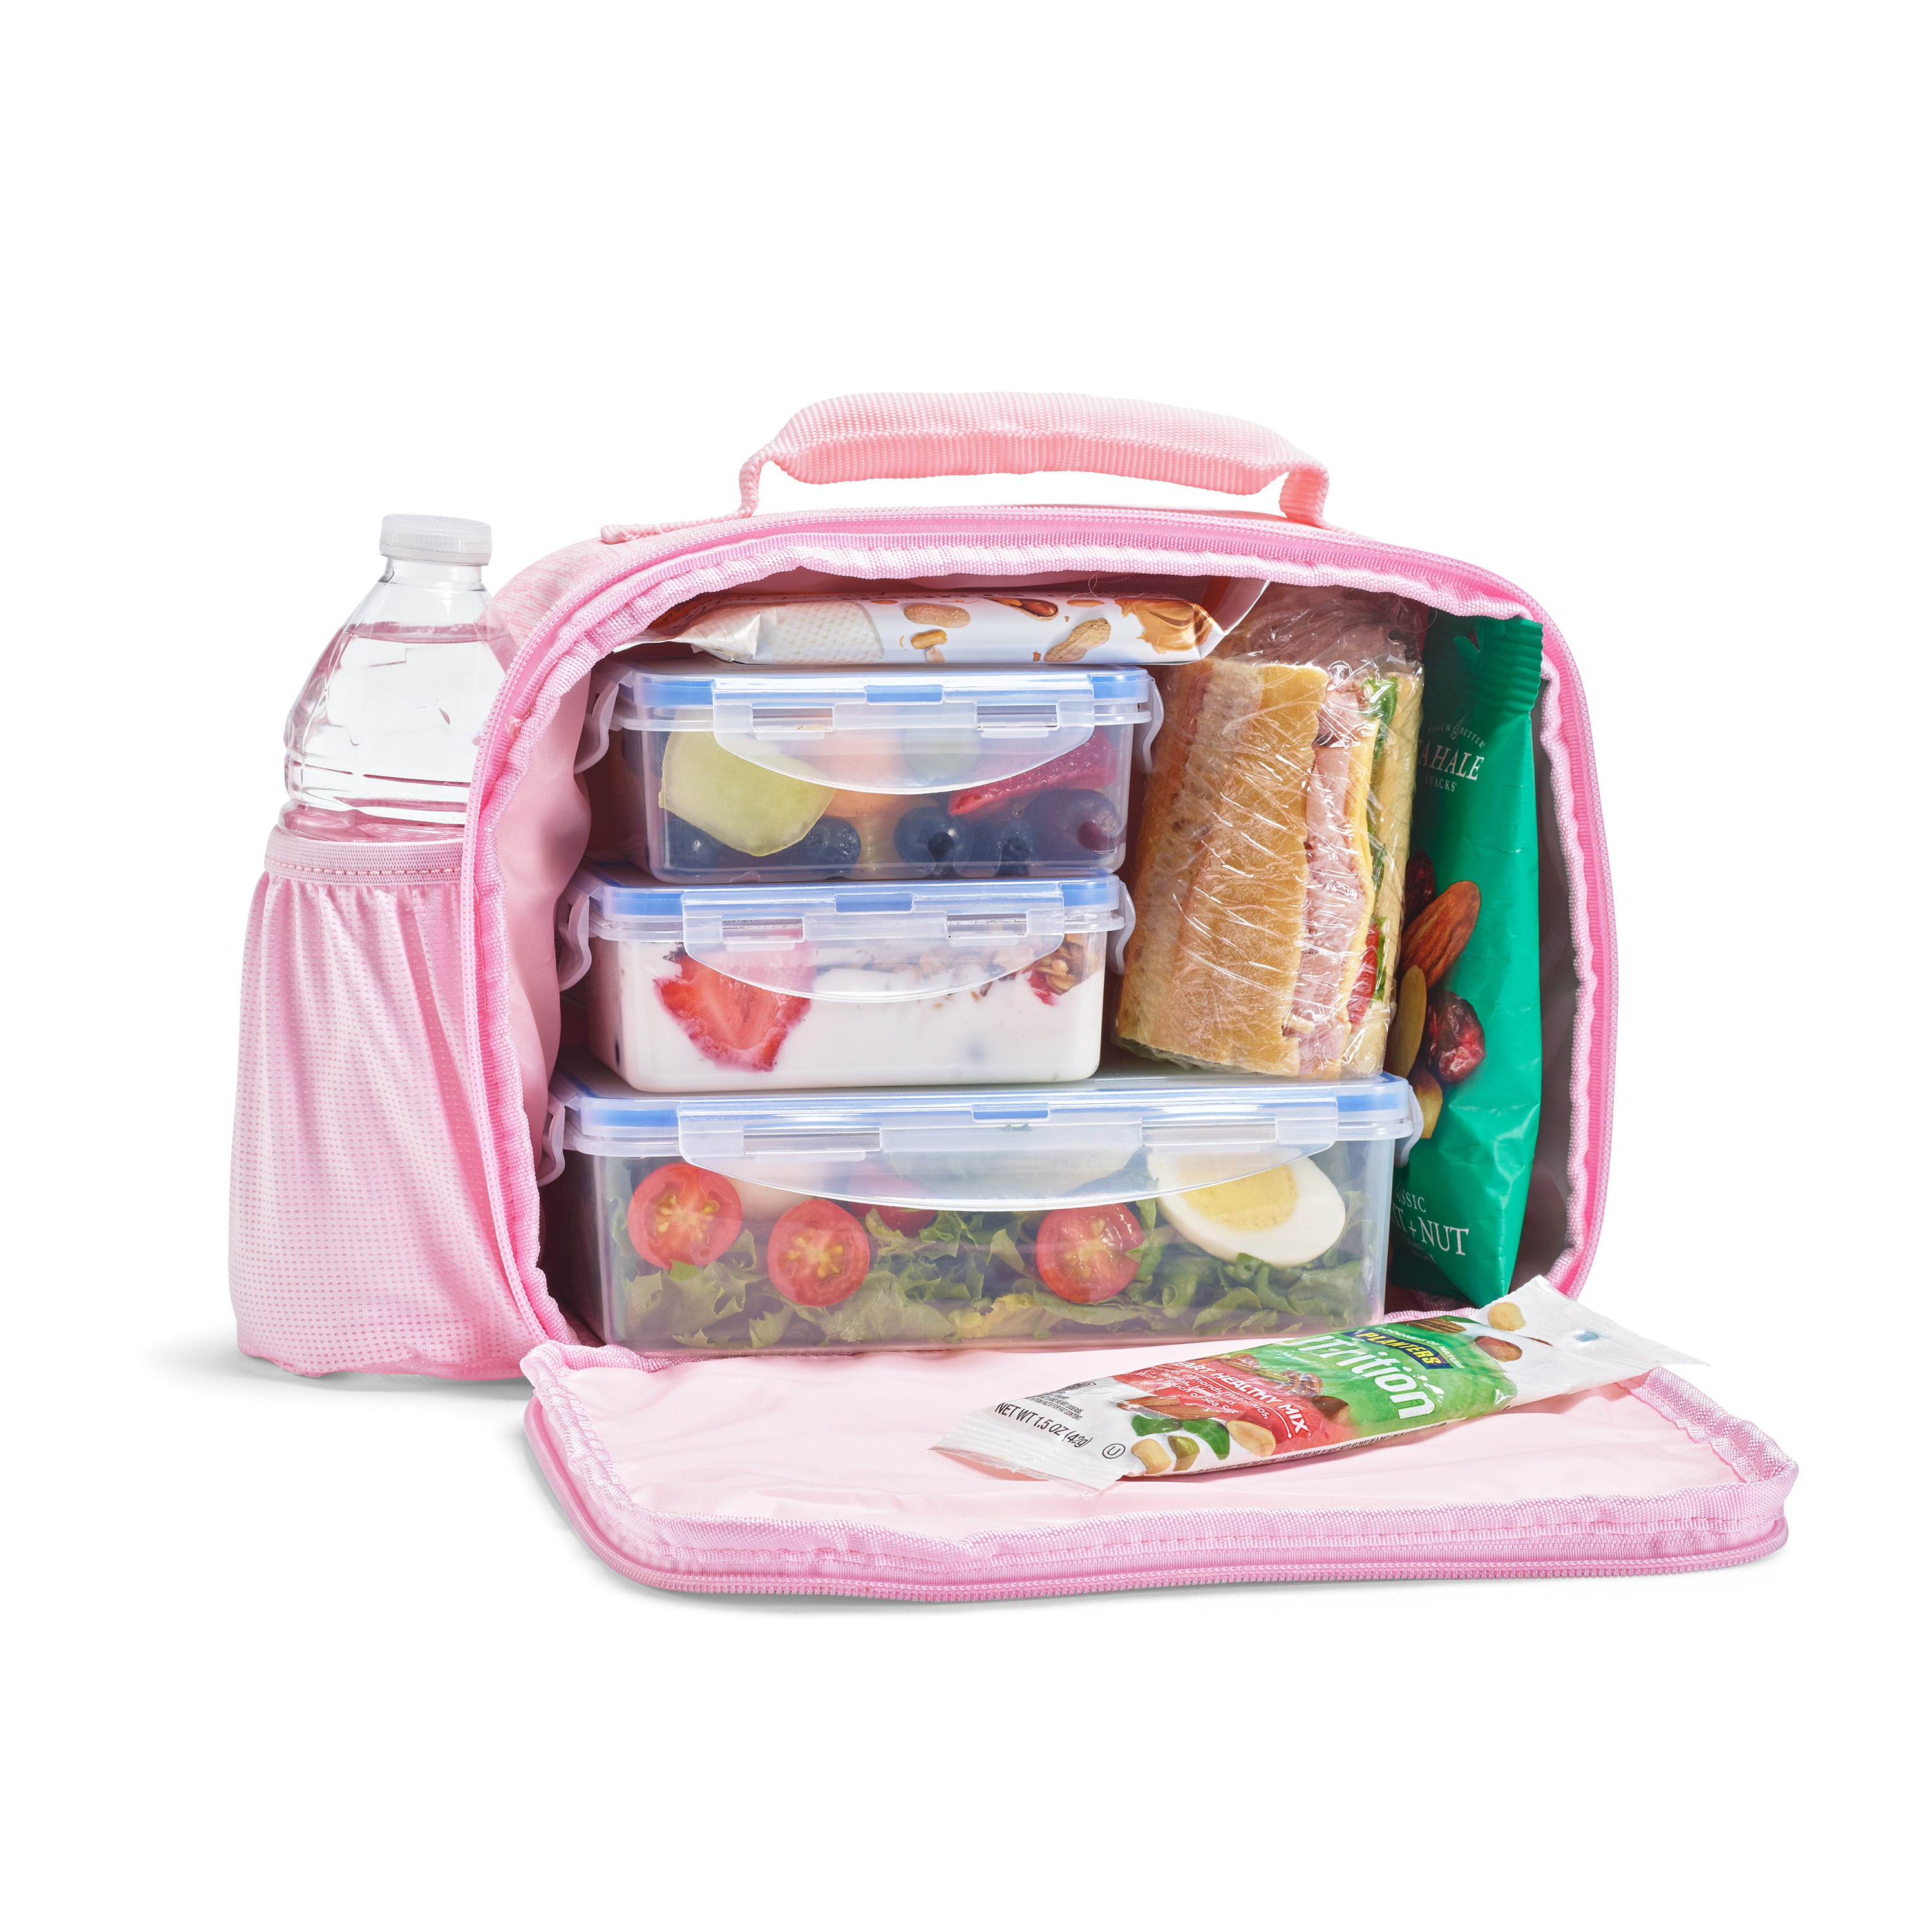 Merangue Kids Cat Insulated Lunch Bag - Shop Lunch Boxes at H-E-B